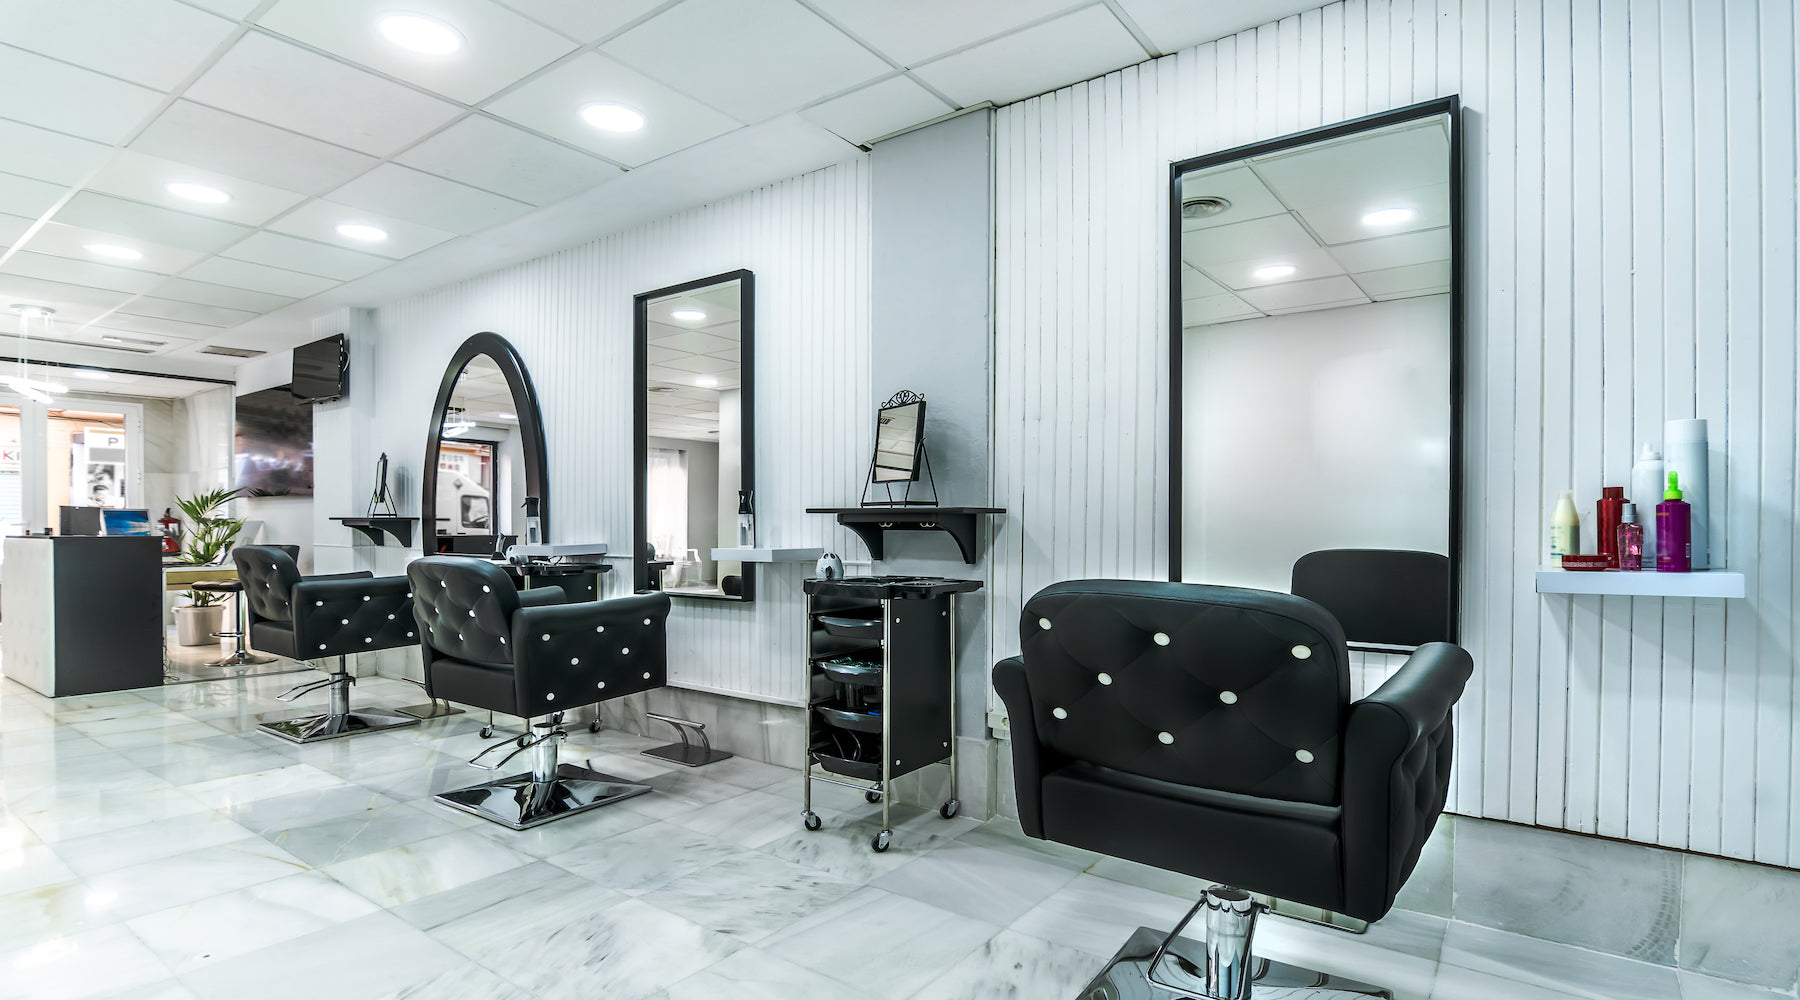 Salon lighting installed in a modern and bright beauty salon